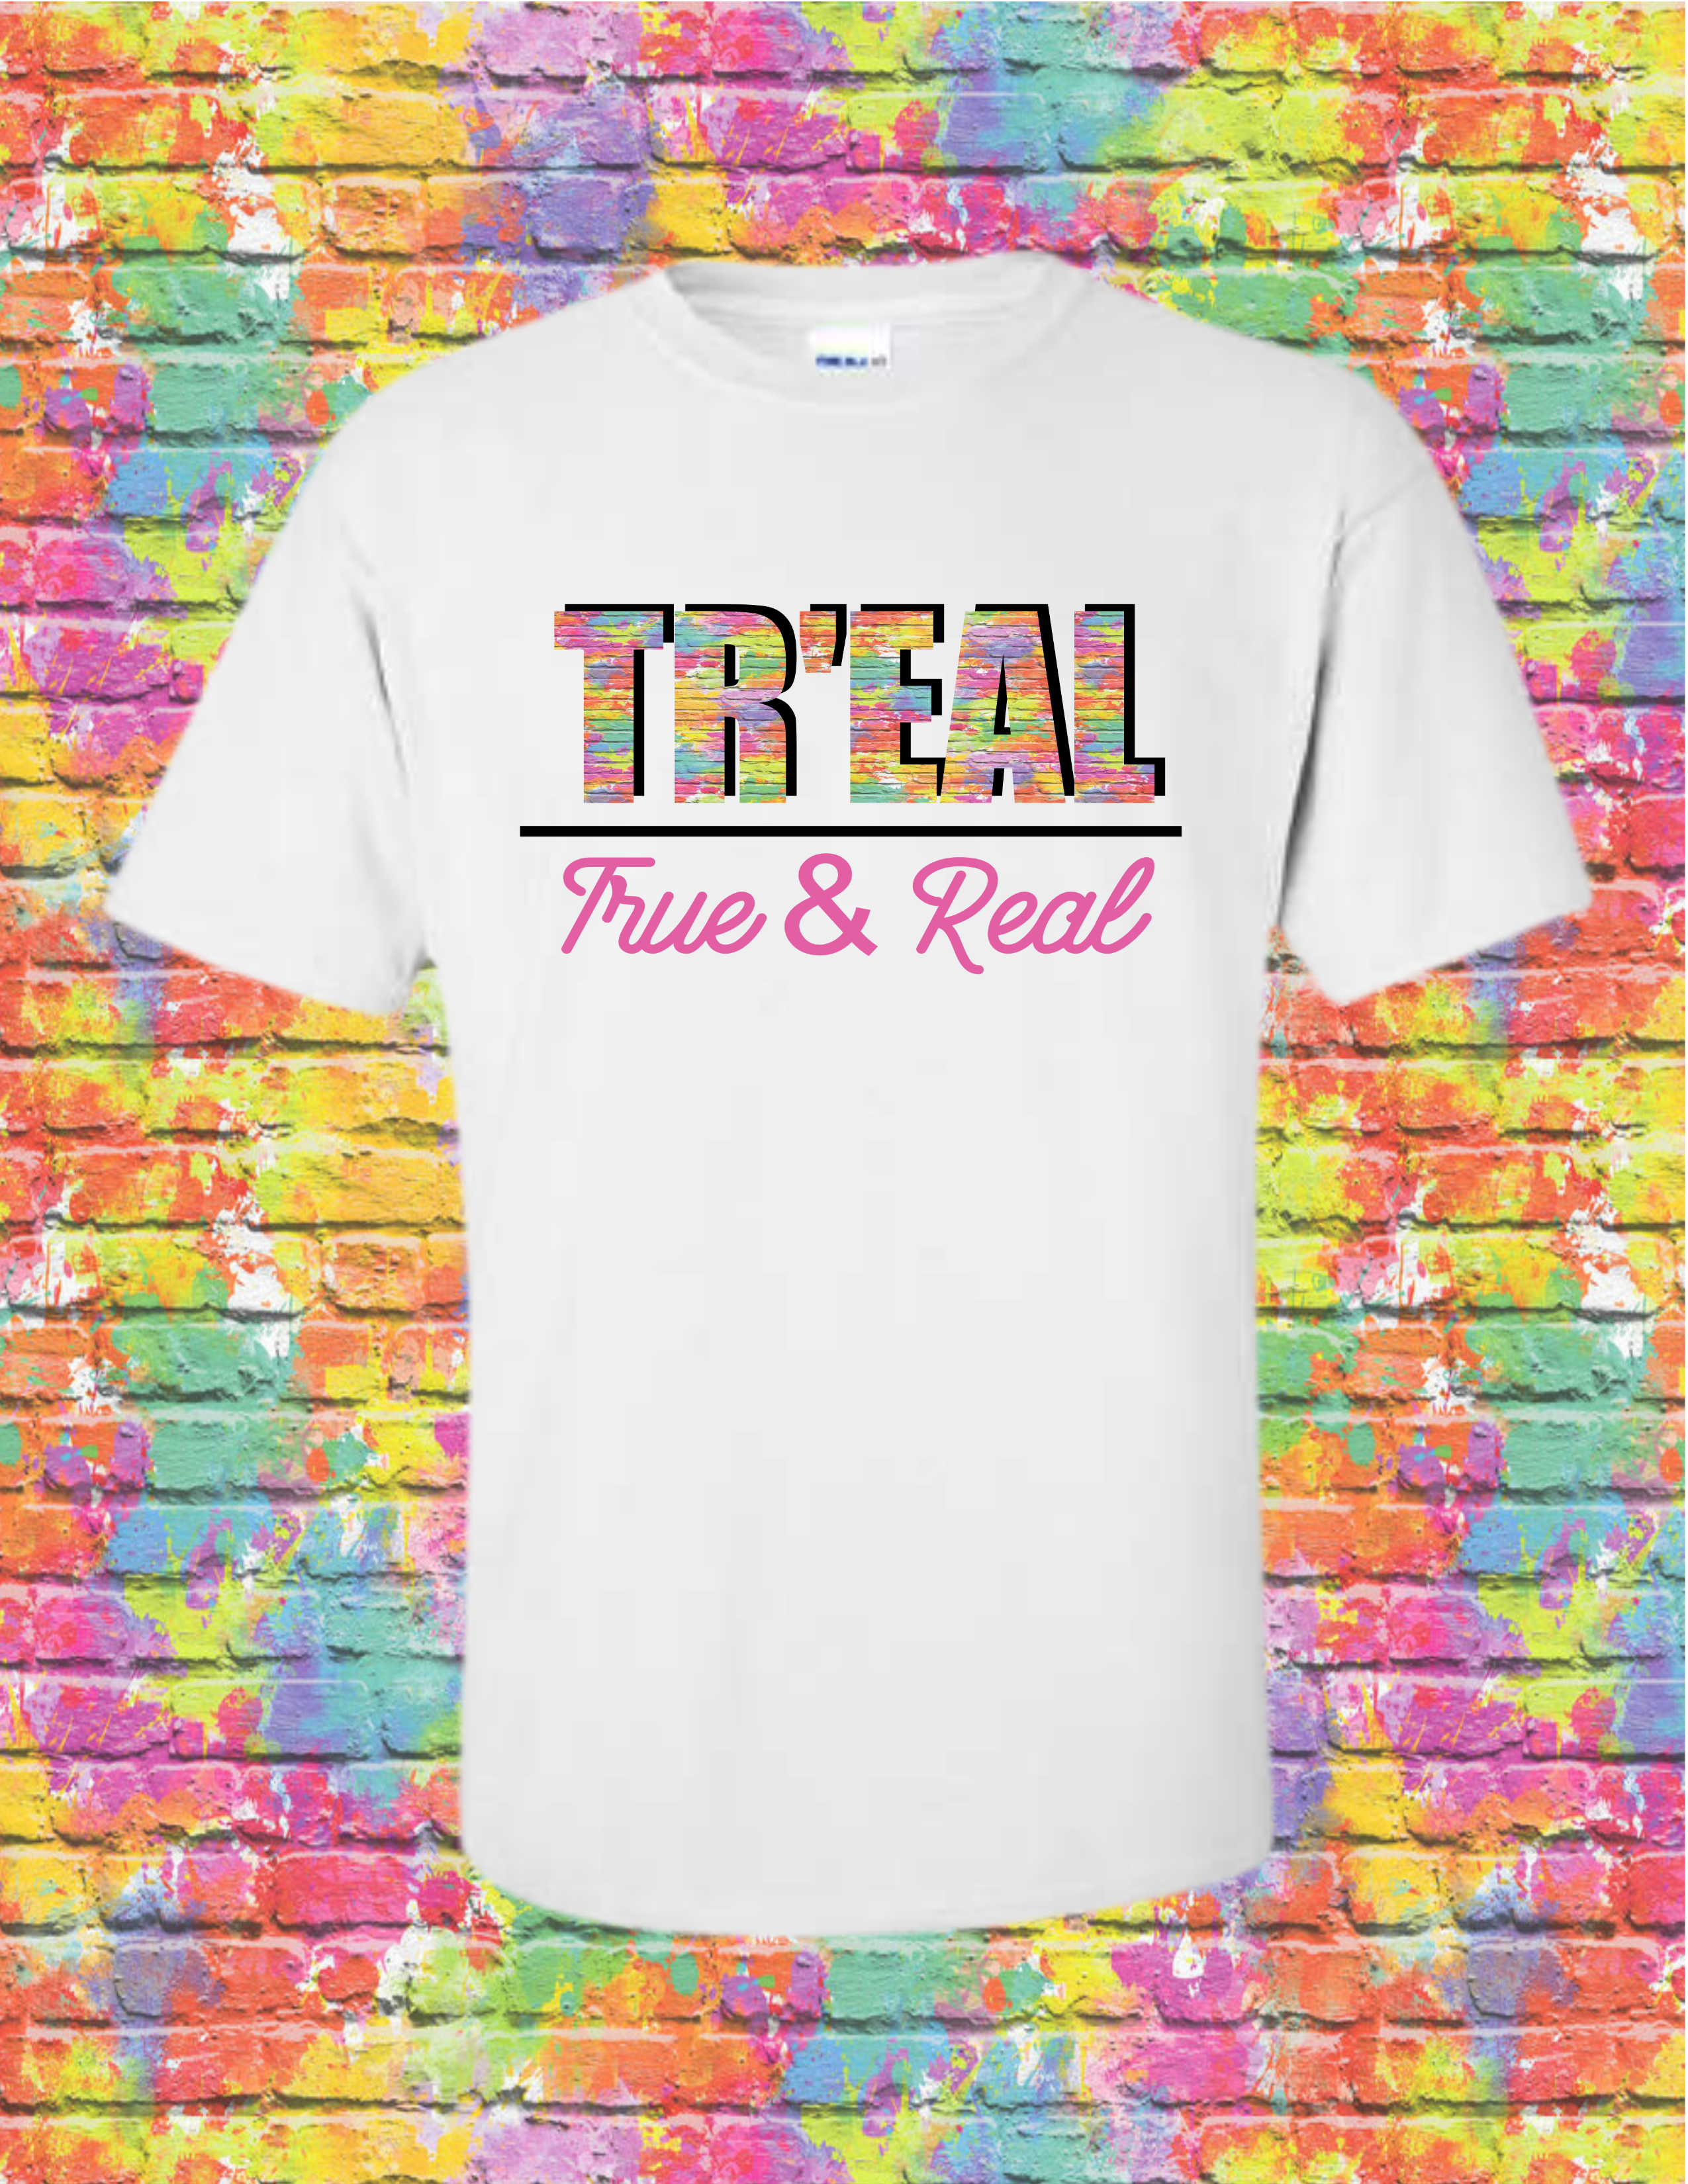 TR'EAL - True & Real T-Shirt (Sublimation)